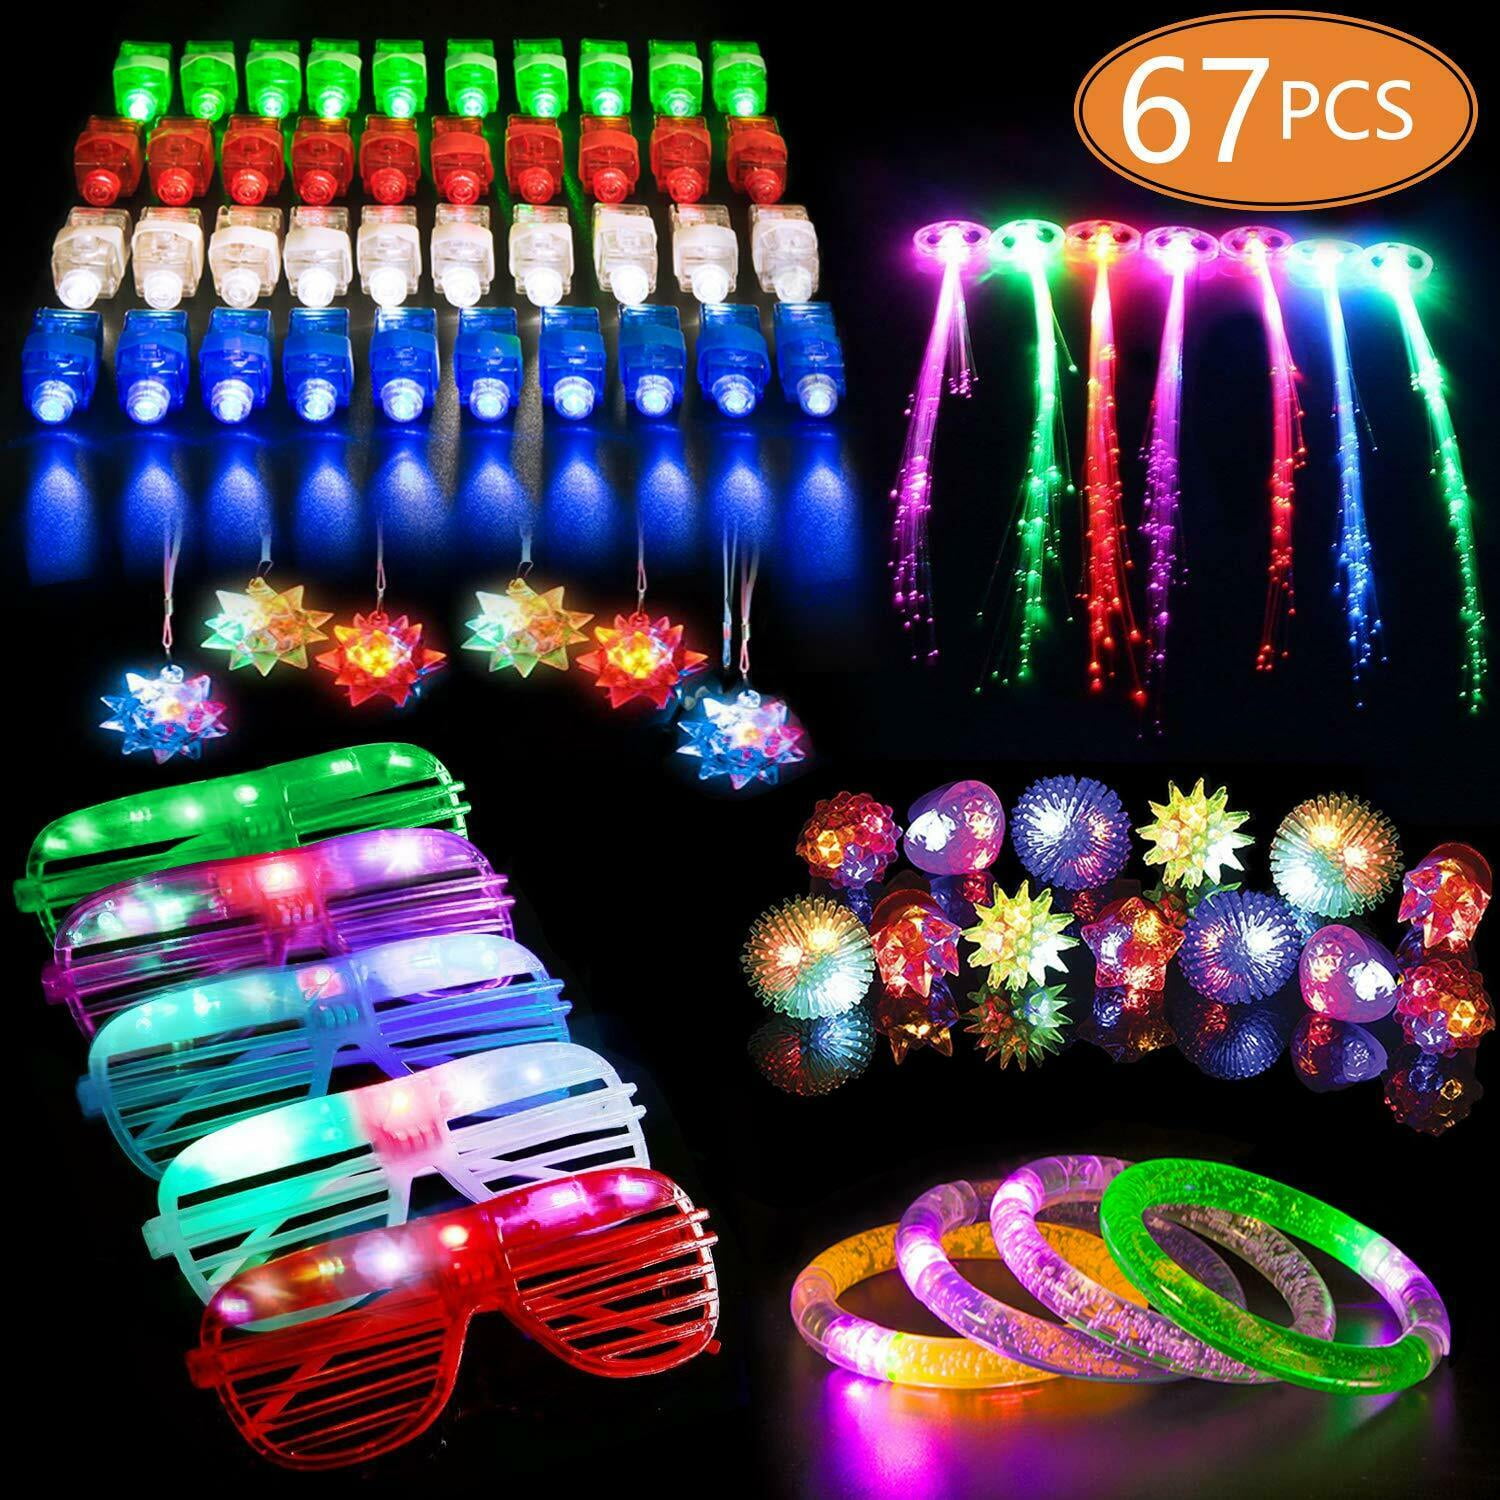 Details about   Retro Game Mibote 70Pcs Led Light Up Toys Party Favors Glow In The Dark Supplies